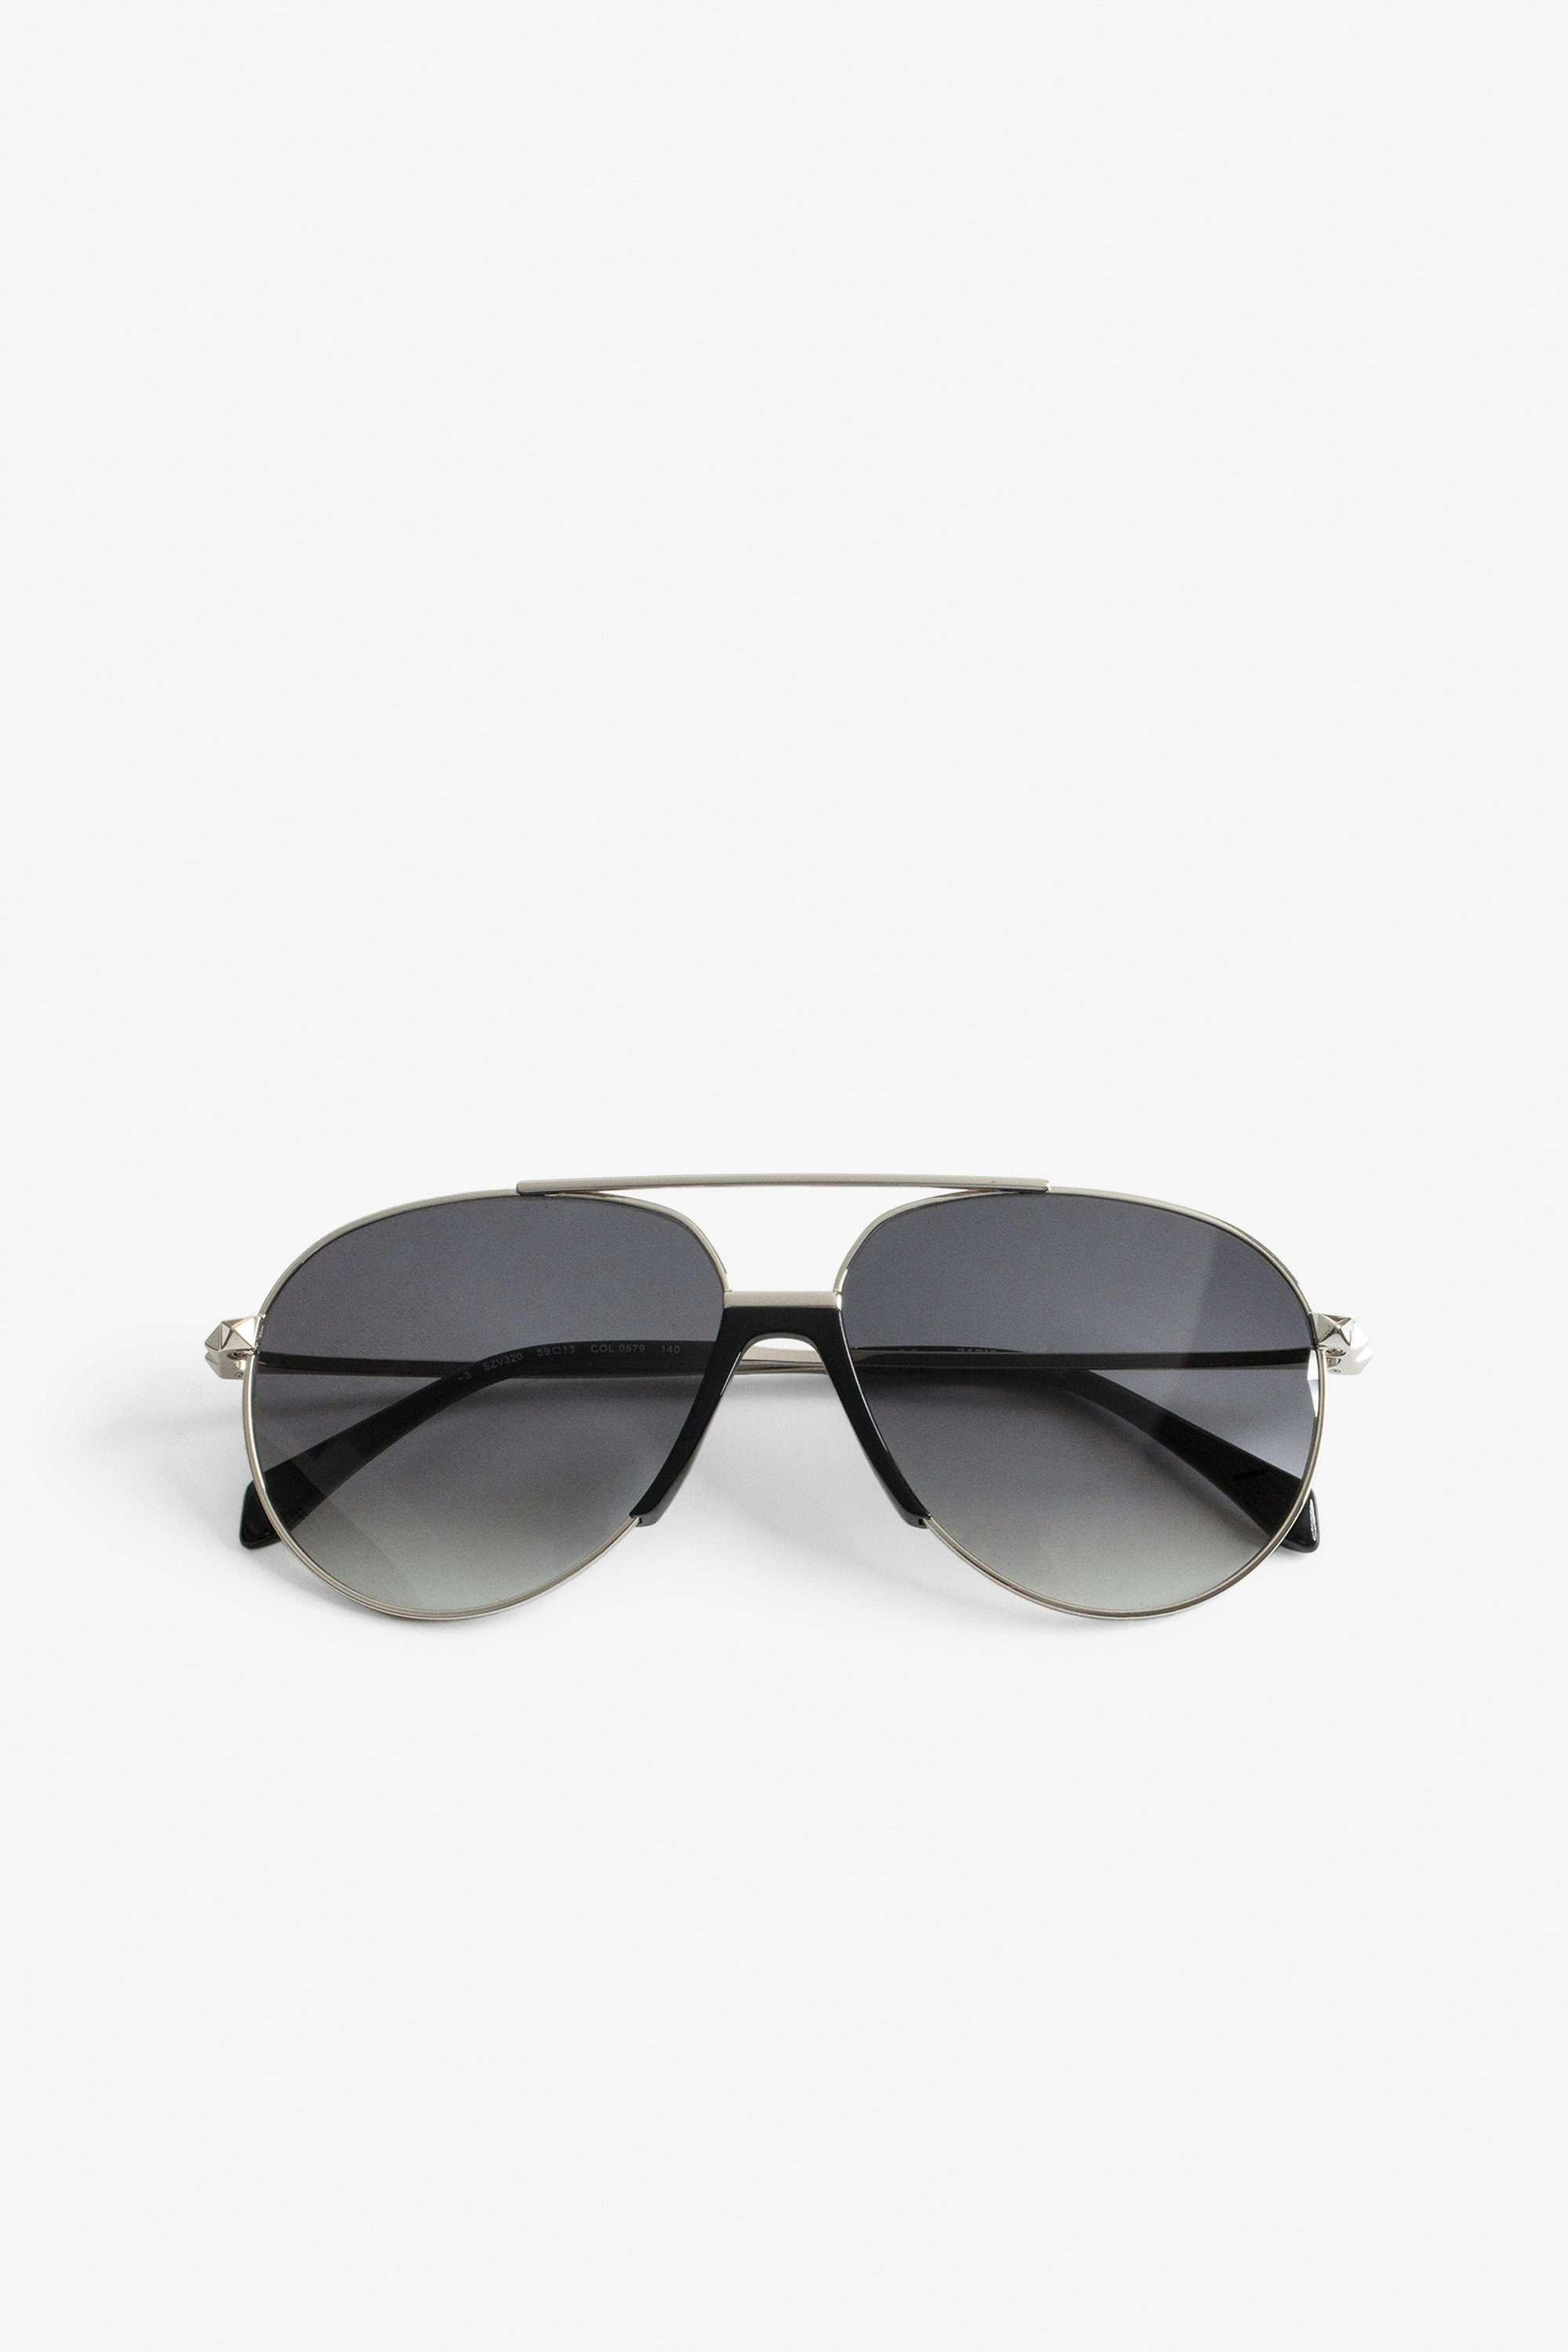 Pyramid Studs Sunglasses - Black sunglasses with smoked lenses decorated with pyramid studs